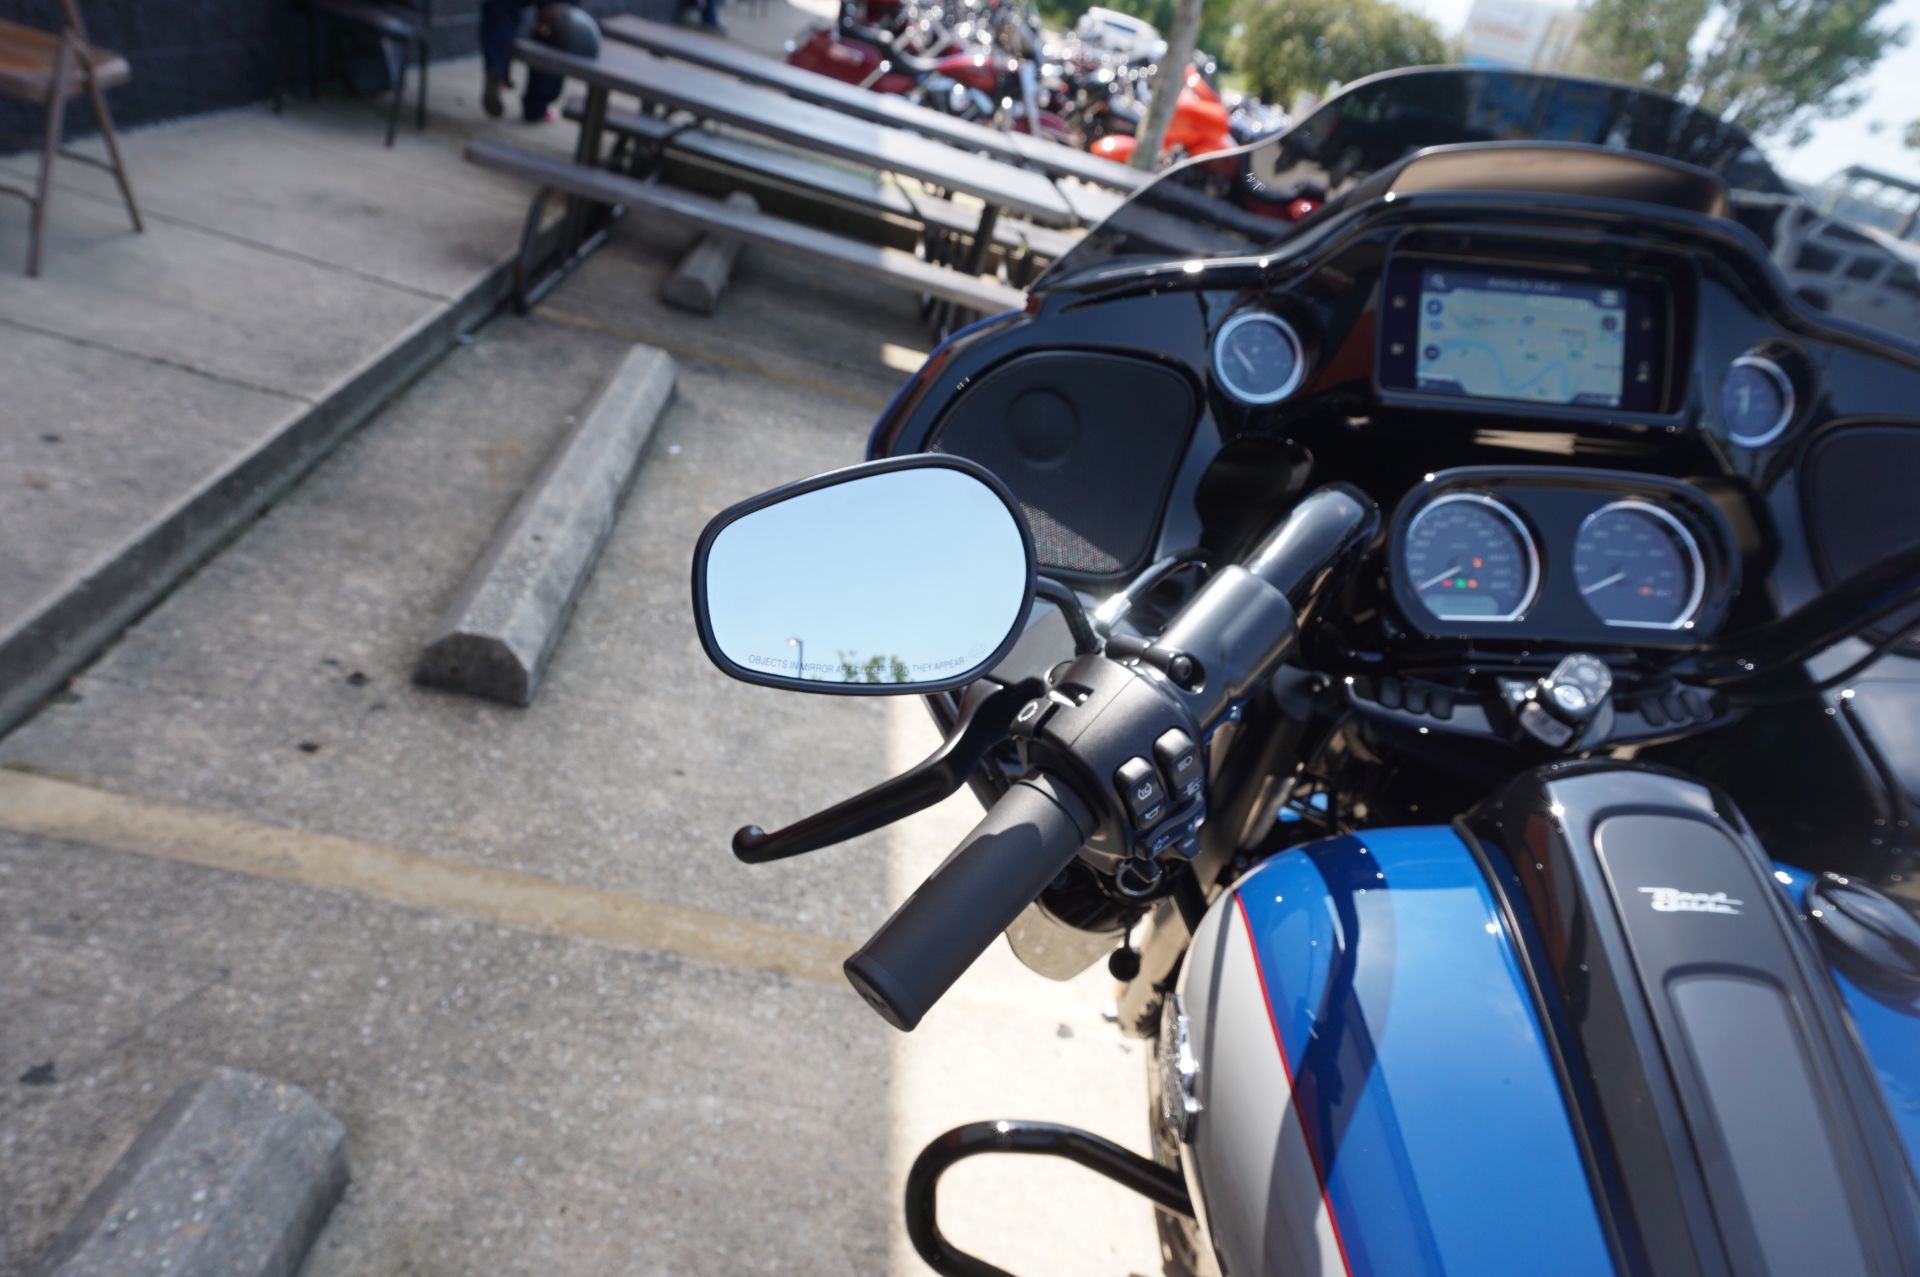 2023 Harley-Davidson Road Glide® Special in Metairie, Louisiana - Photo 11